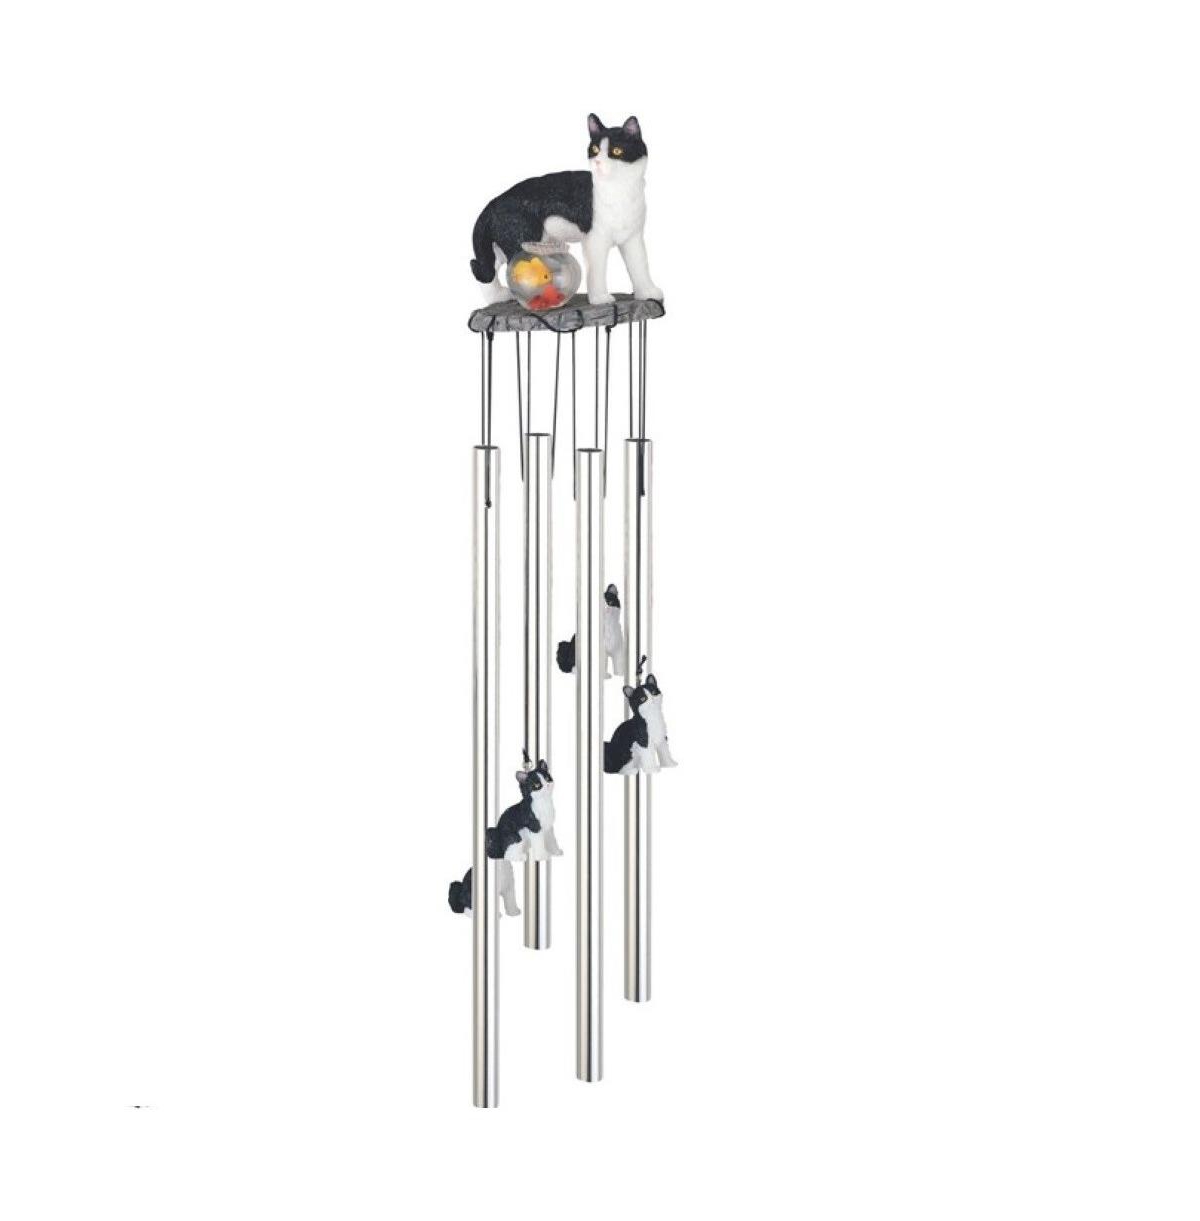 23" Long Tuxedo Kitty Cat with Fish Bowl Round Top Wind Chime Home Decor Perfect Gift for House Warming, Holidays and Birthdays - Silver